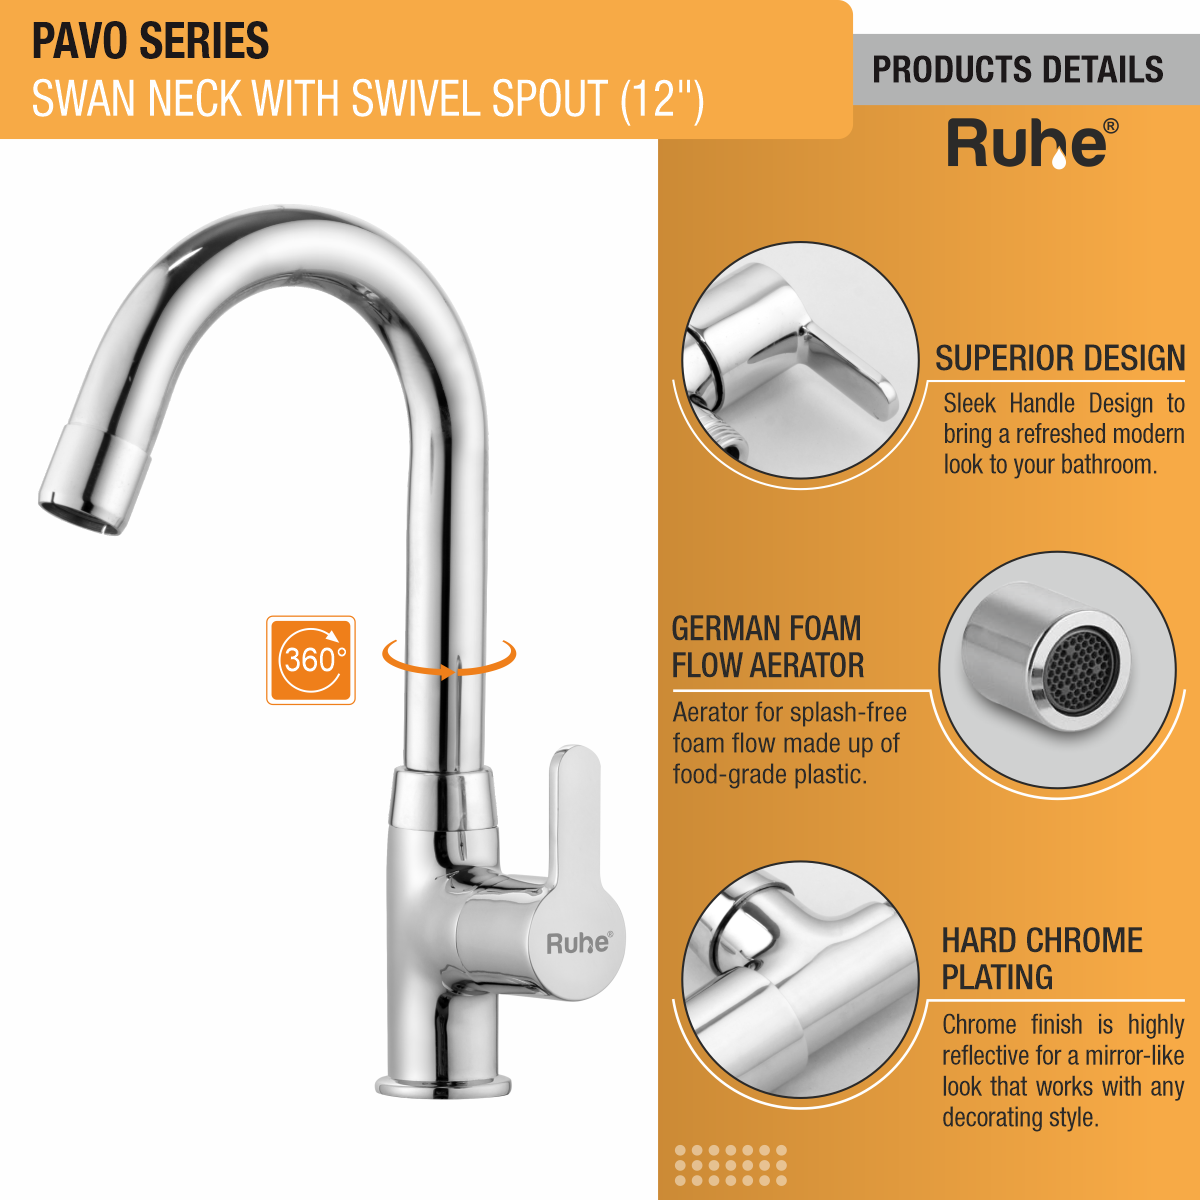 Pavo Swan Neck with Small (12 inches) Round Swivel Spout Brass Faucet product details